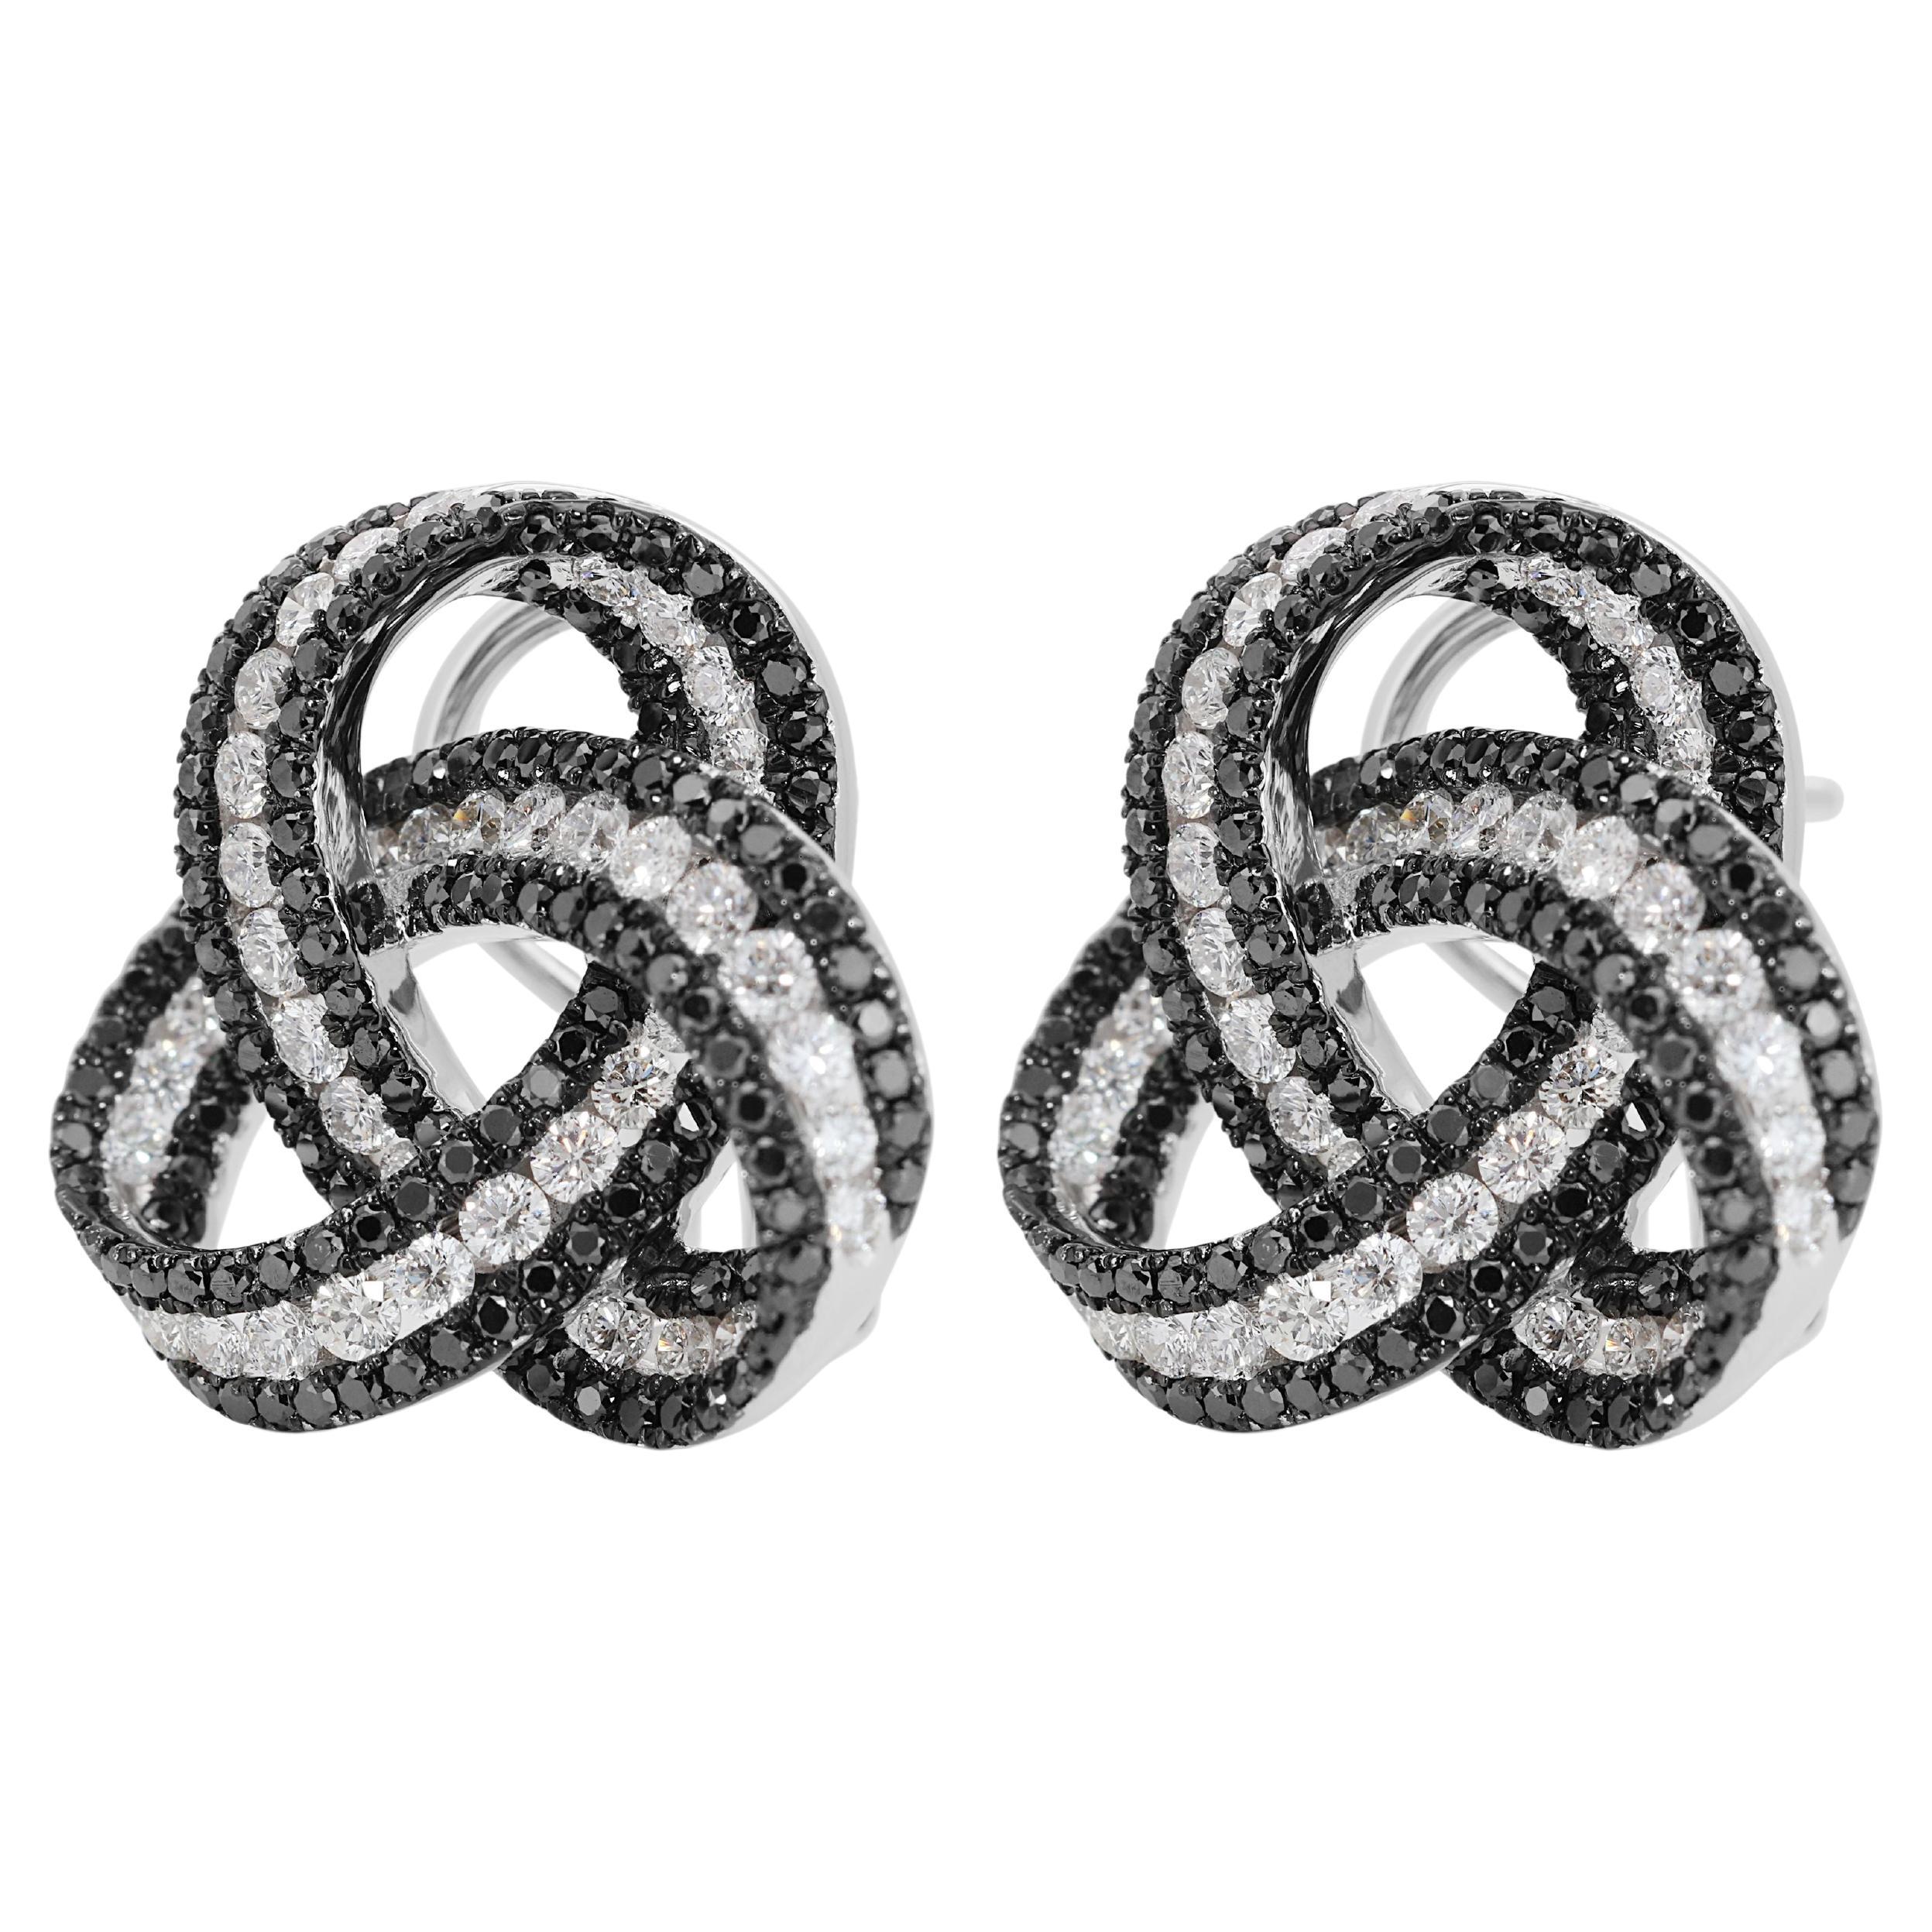 18k White Gold Twist Knot Stud Earrings with 3.85 Carat of Natural Diamonds